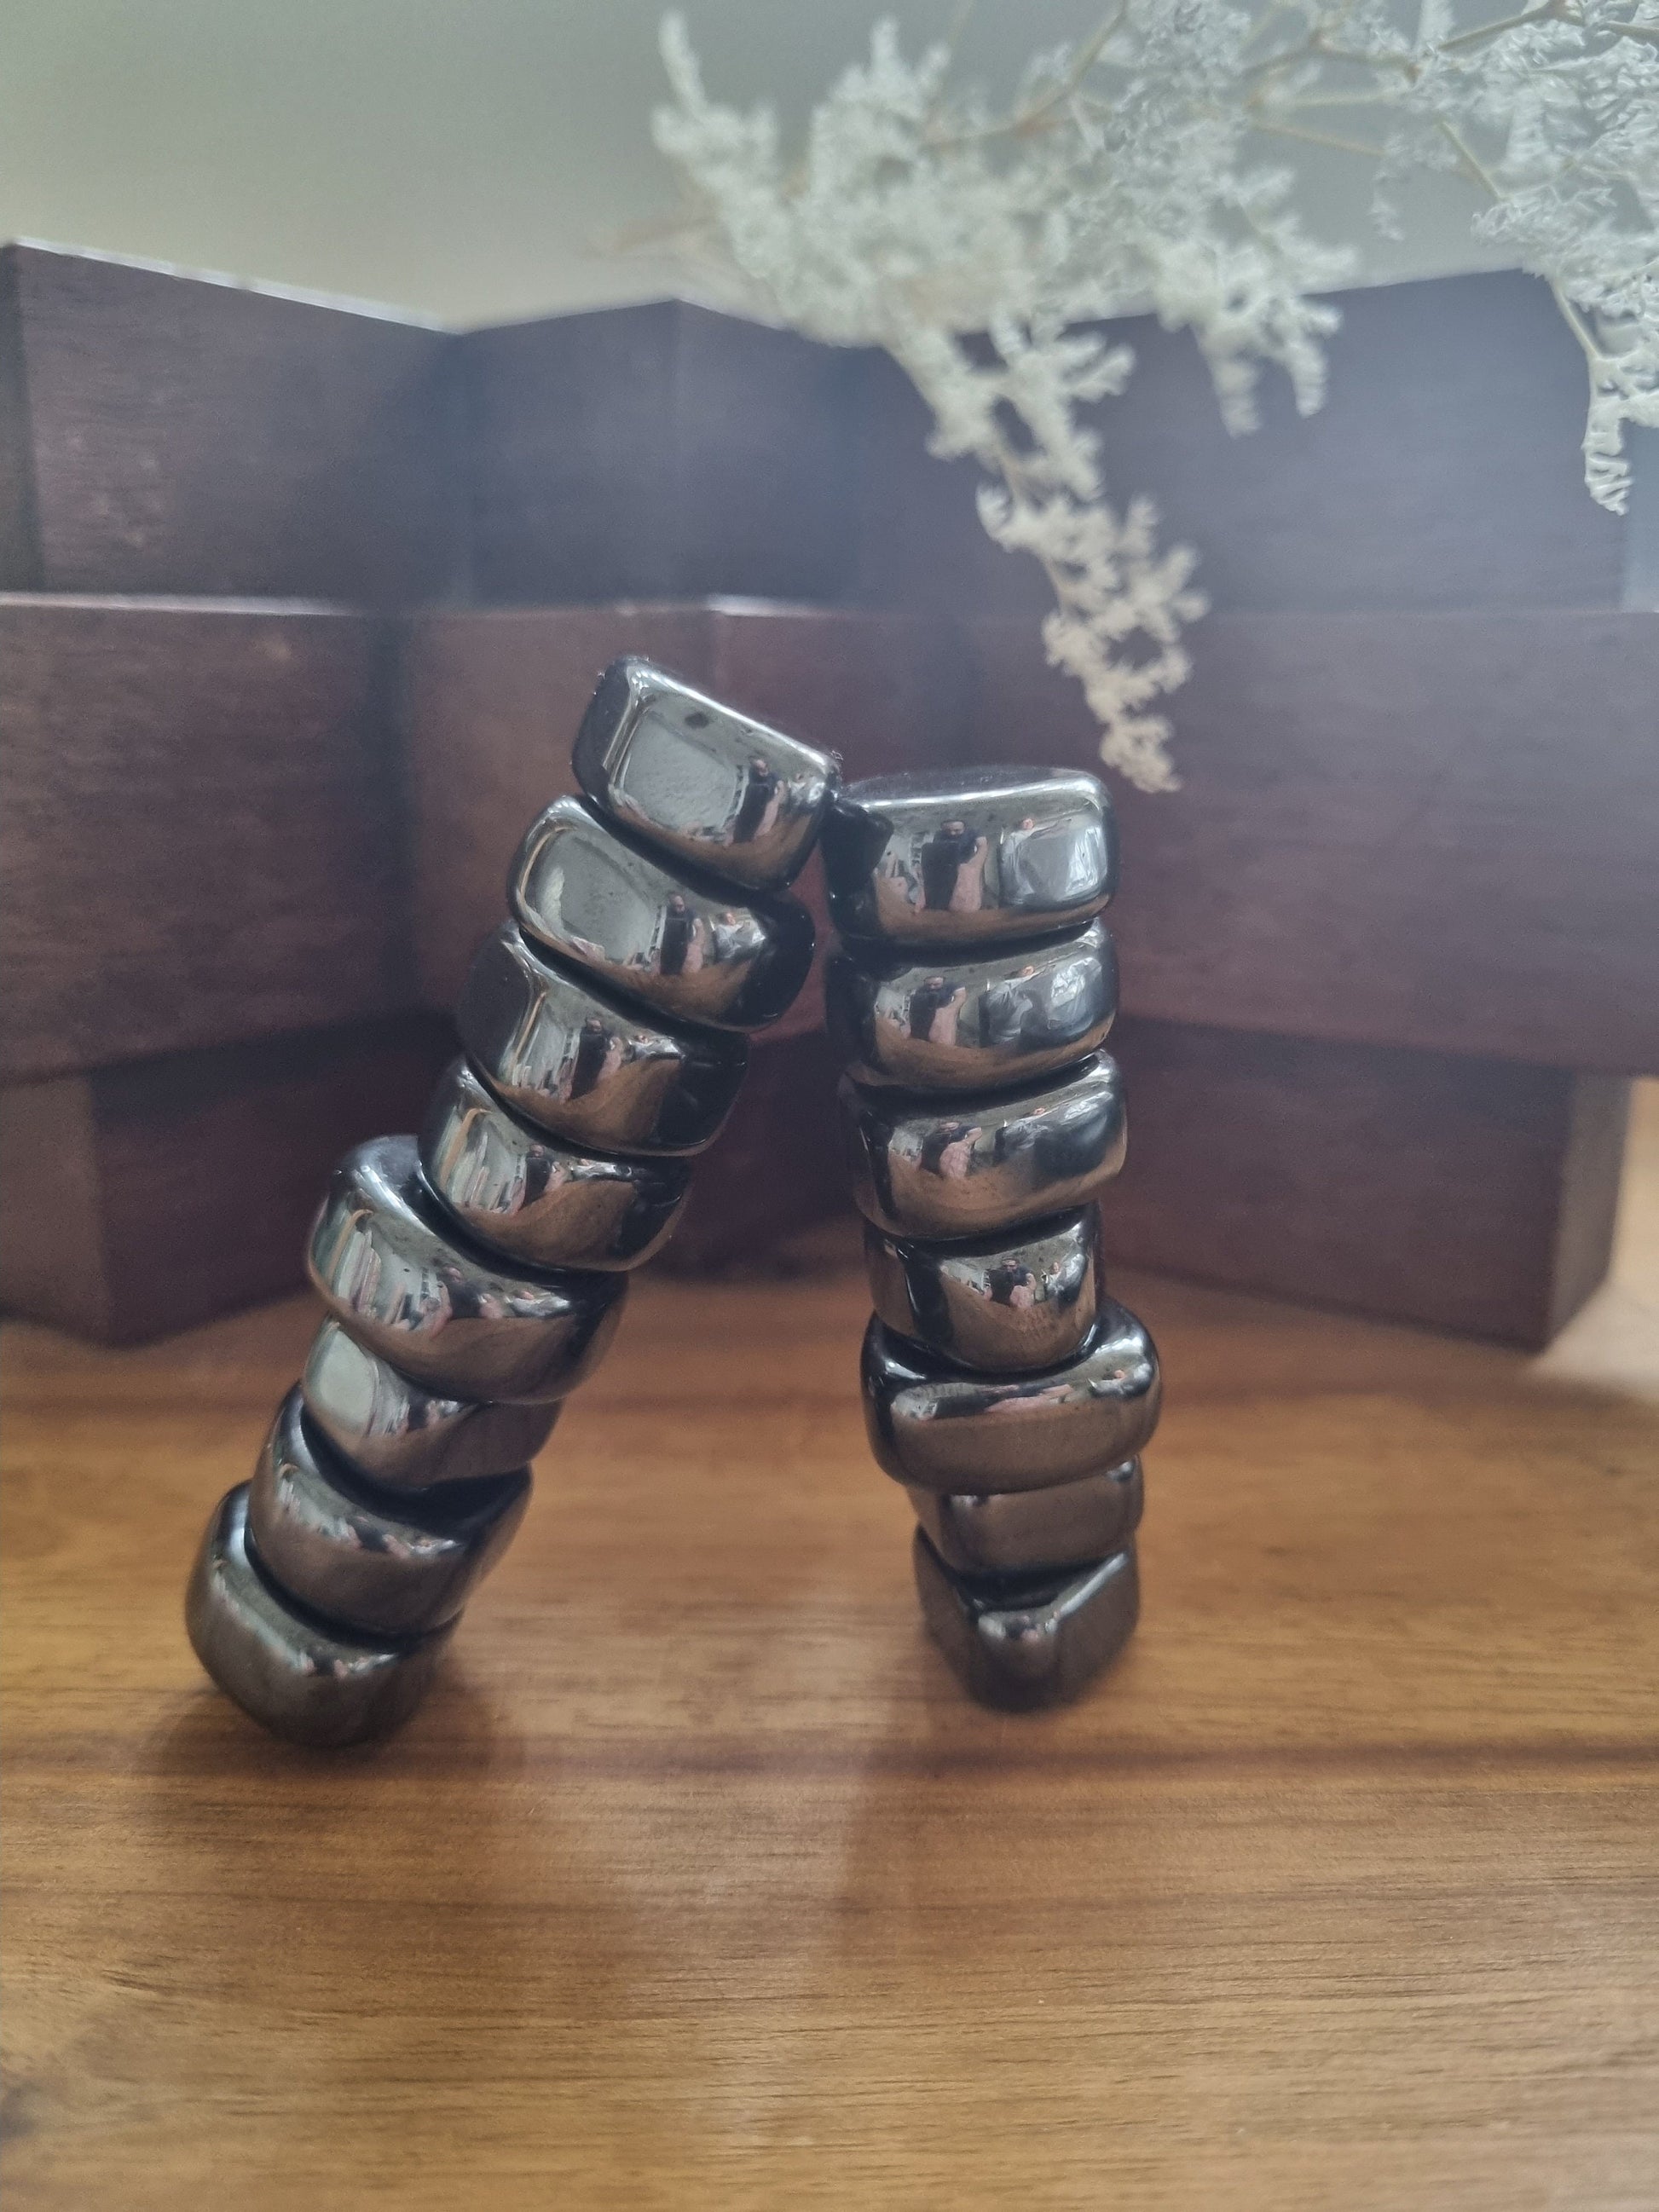 Magnetic Hematite tumble stone / The Protection stone - Universal Fate